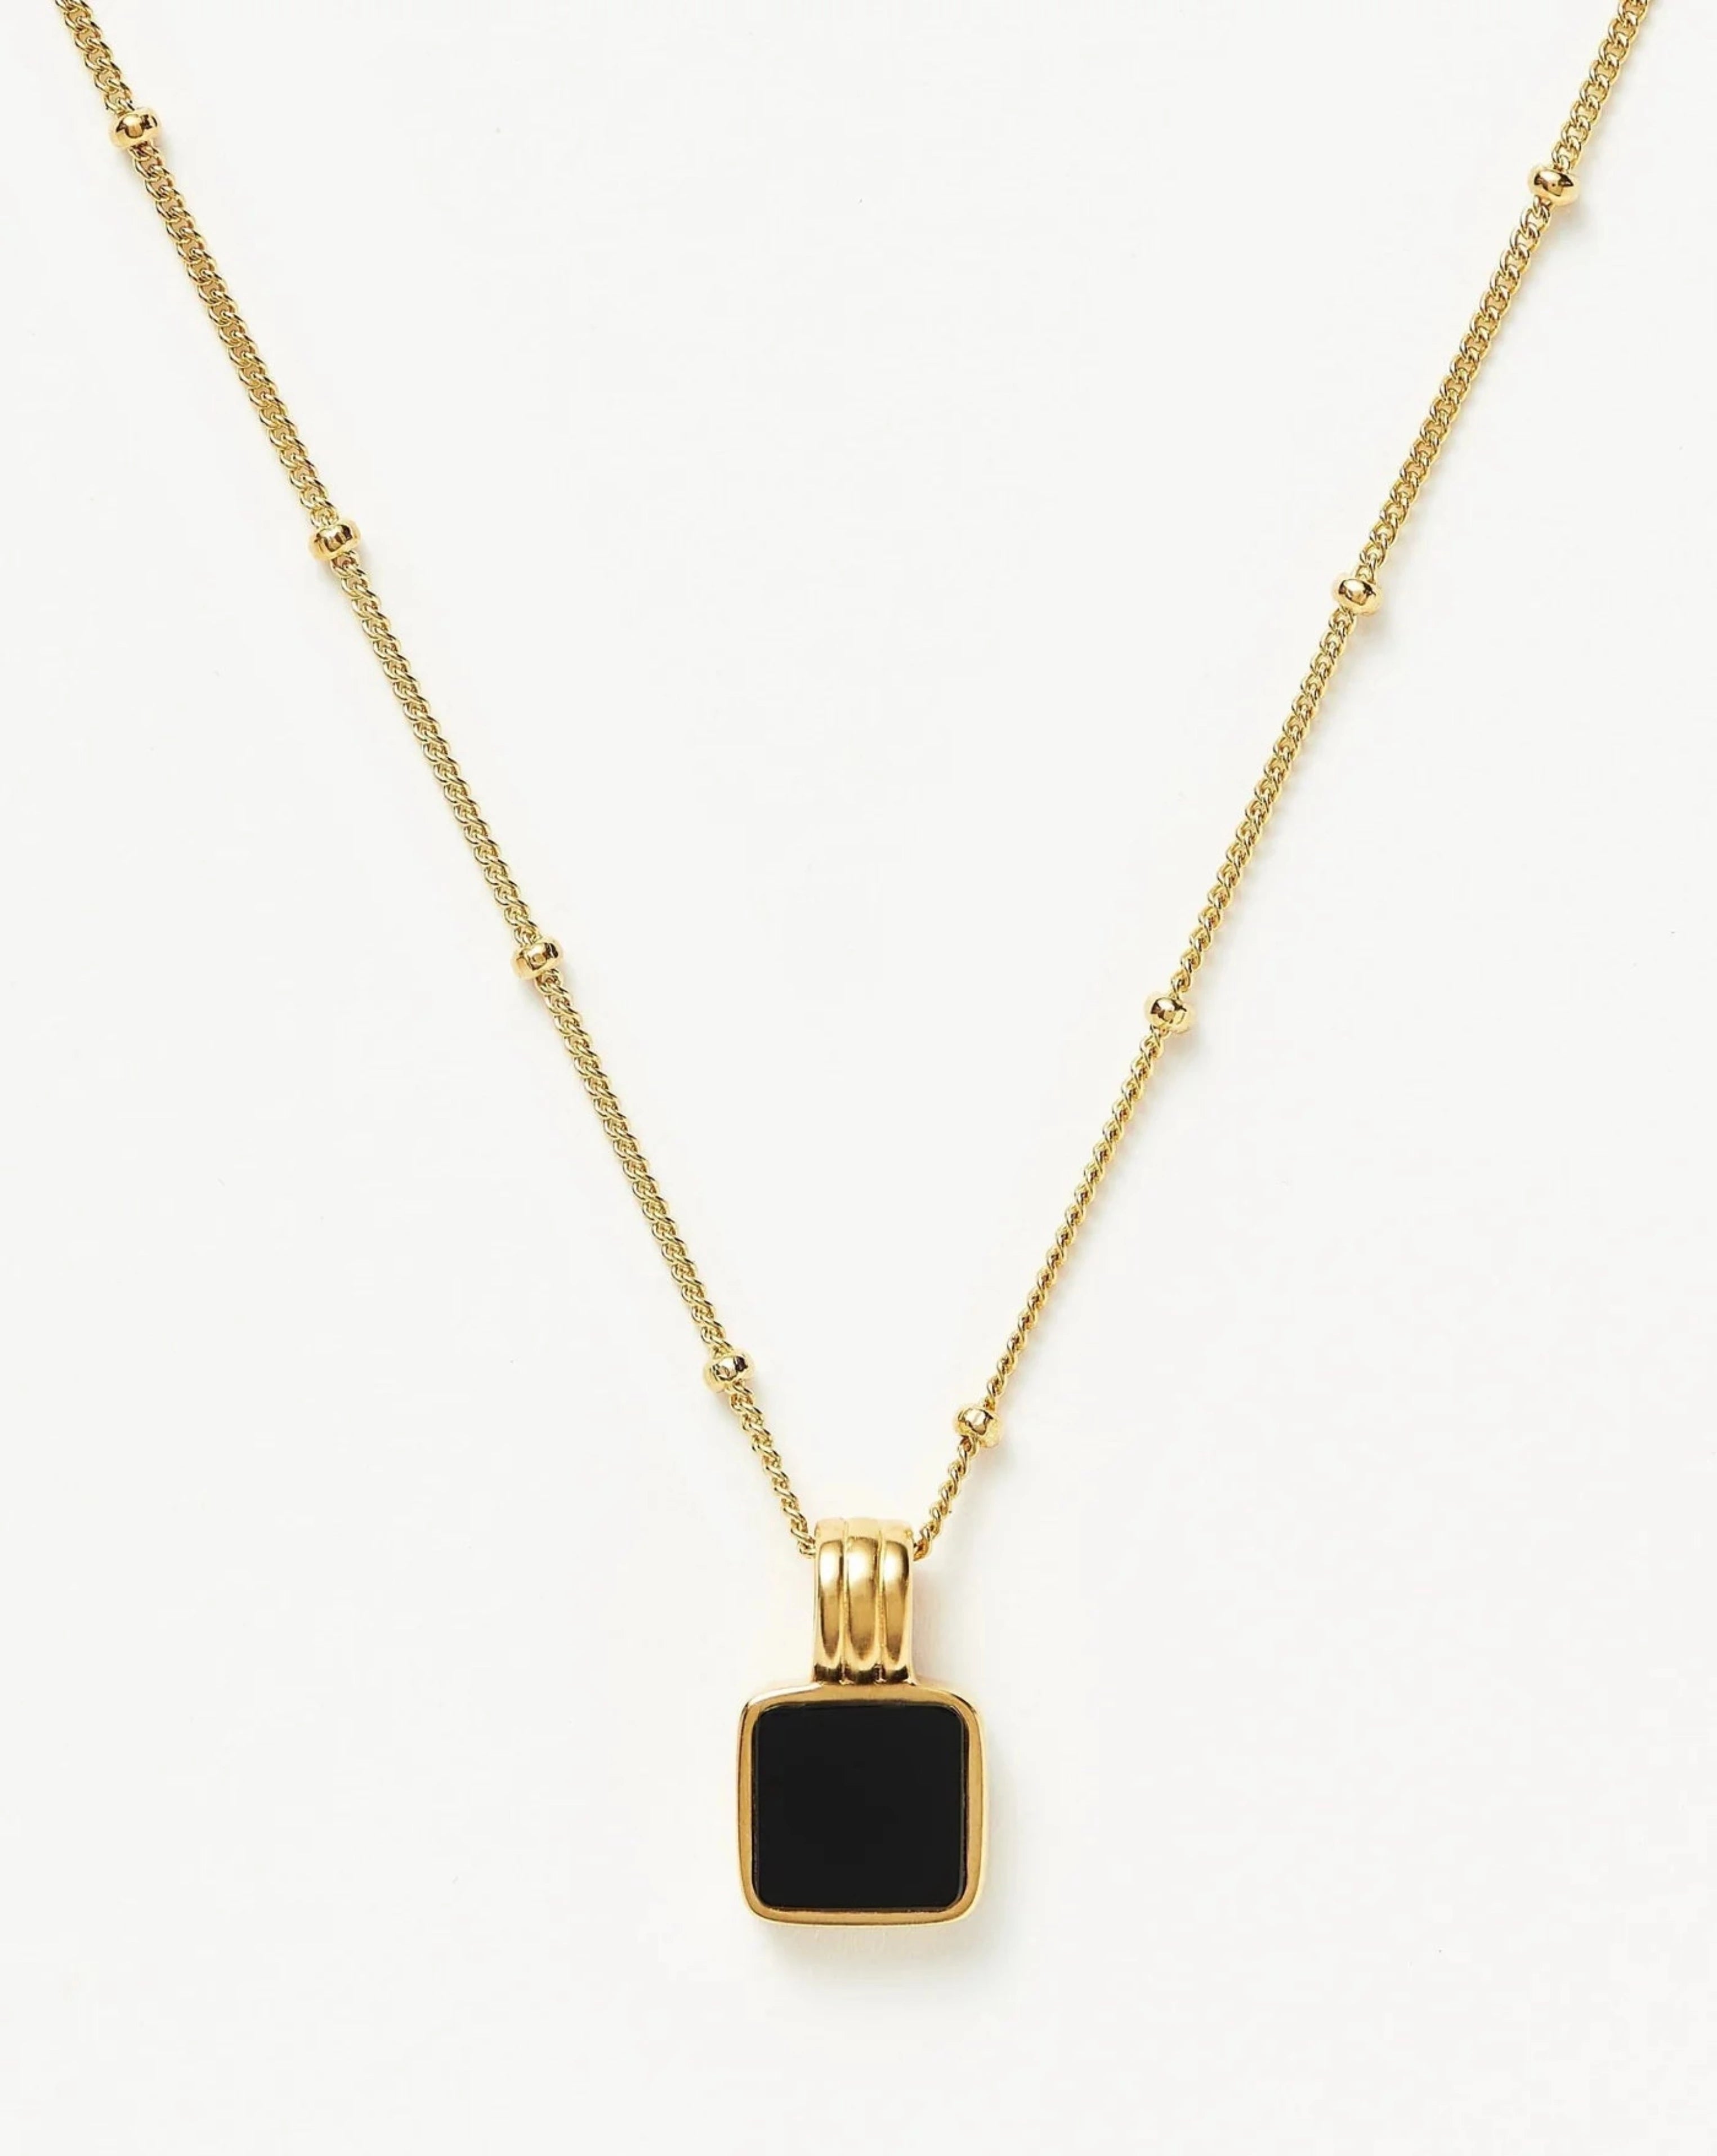 Buy Black Onyx and Gold Bead Necklace Online | Arnold Jewelers